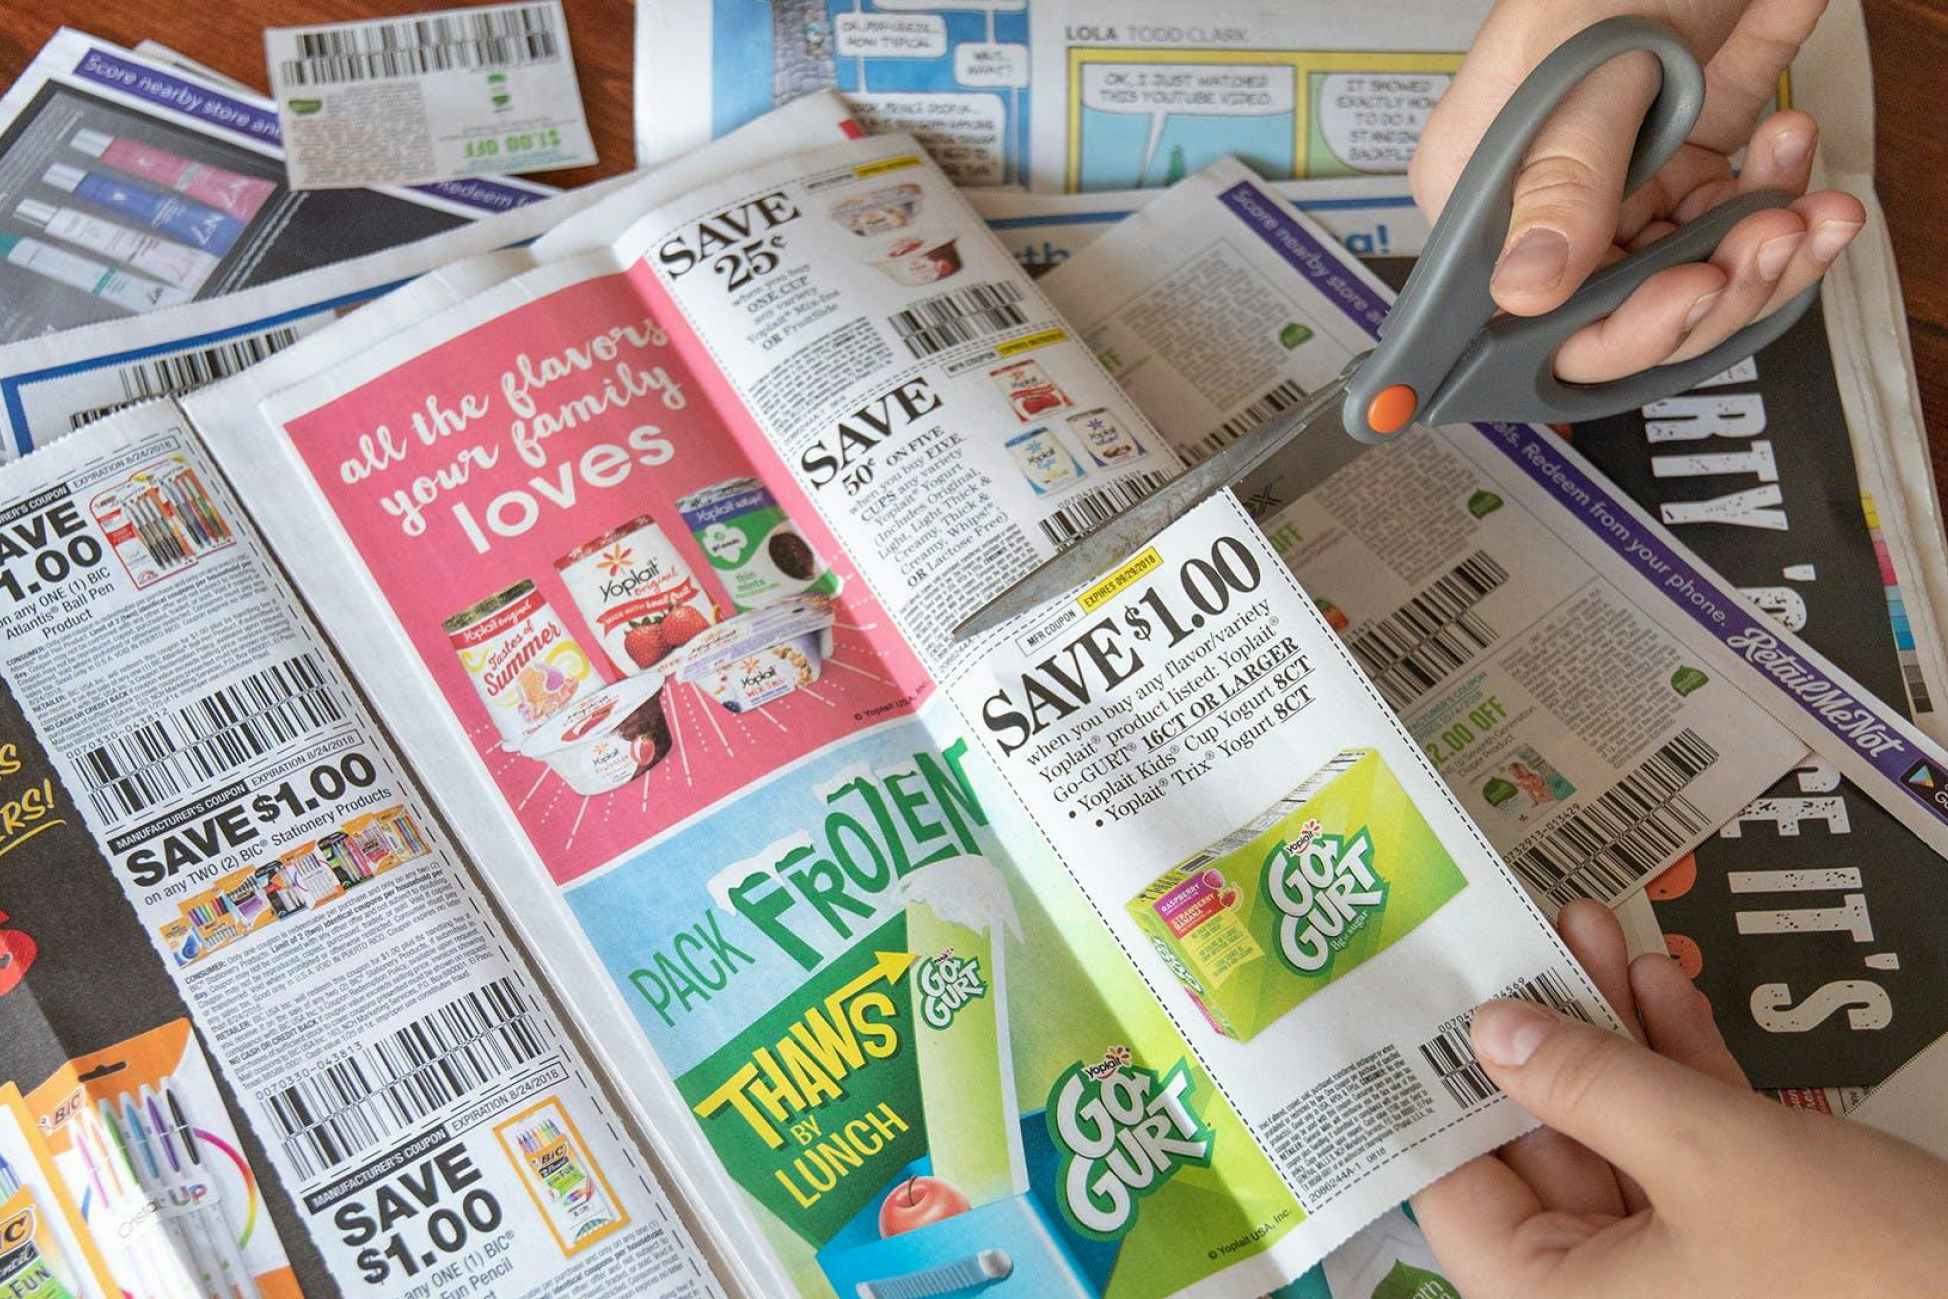 getting-started-KCL-app-cutting-coupons-newspaper